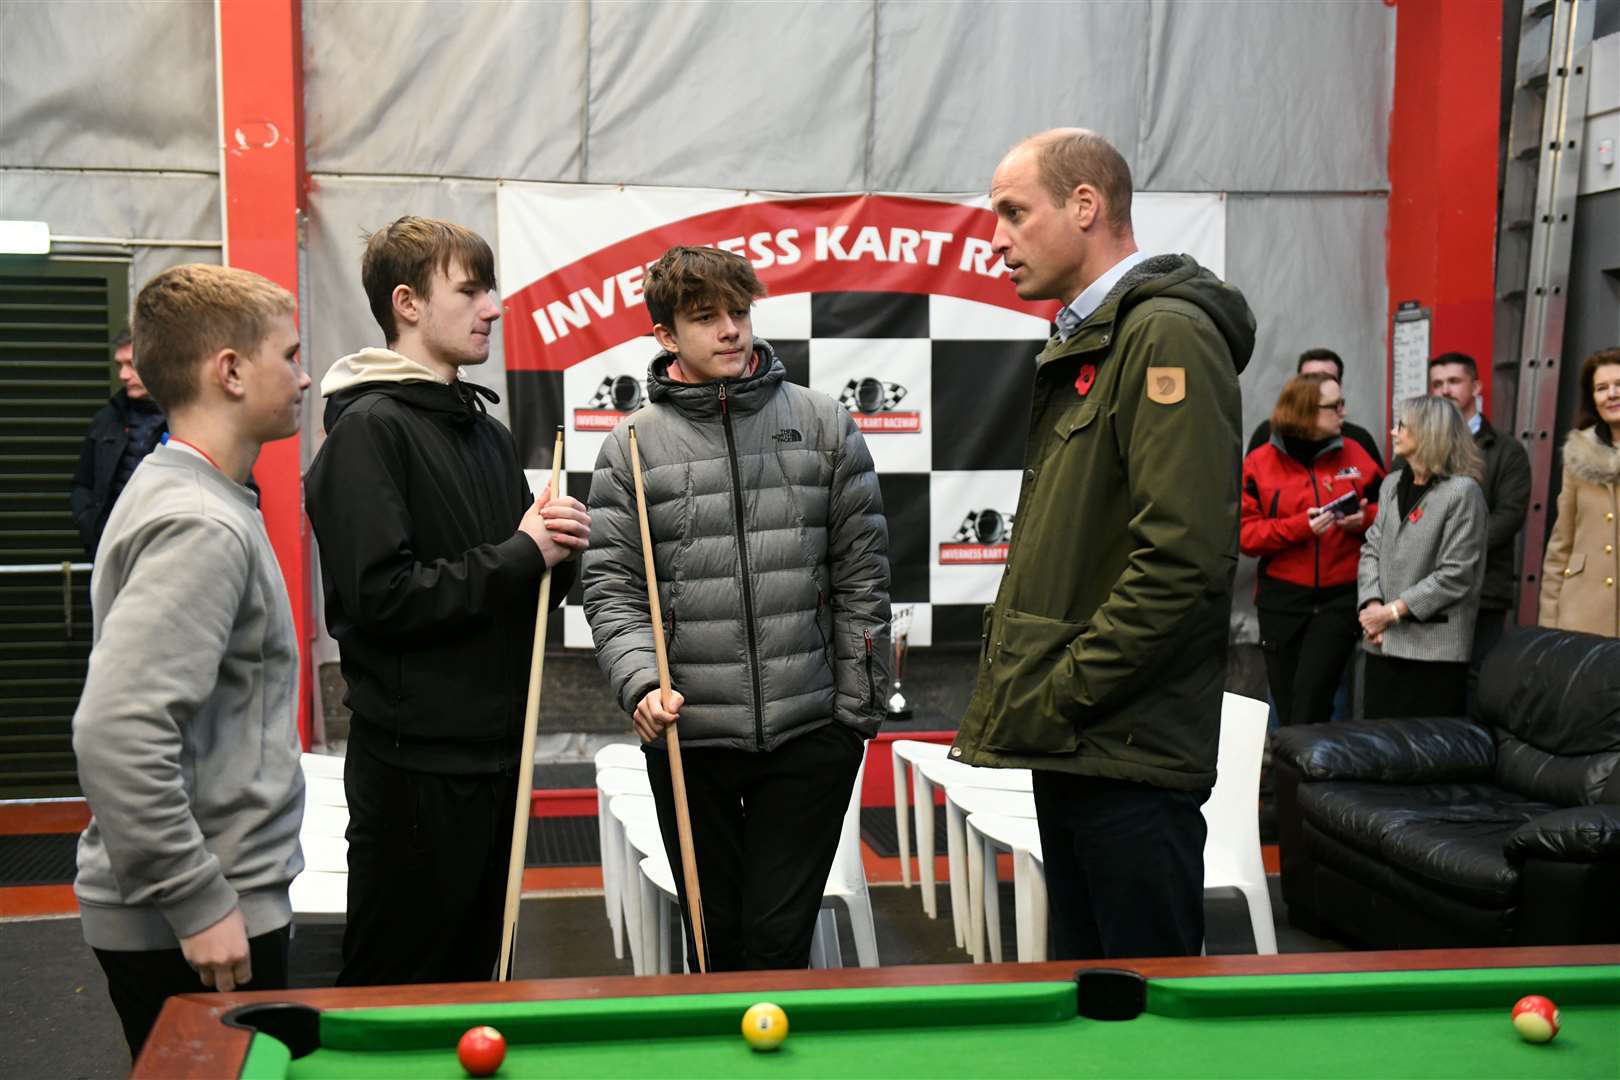 The Prince and Princess of Wales visited Inverness Kart Raceway in November to meet DAY1 mentors and their young people. Picture: Callum Mackay. Picture: Callum Mackay.